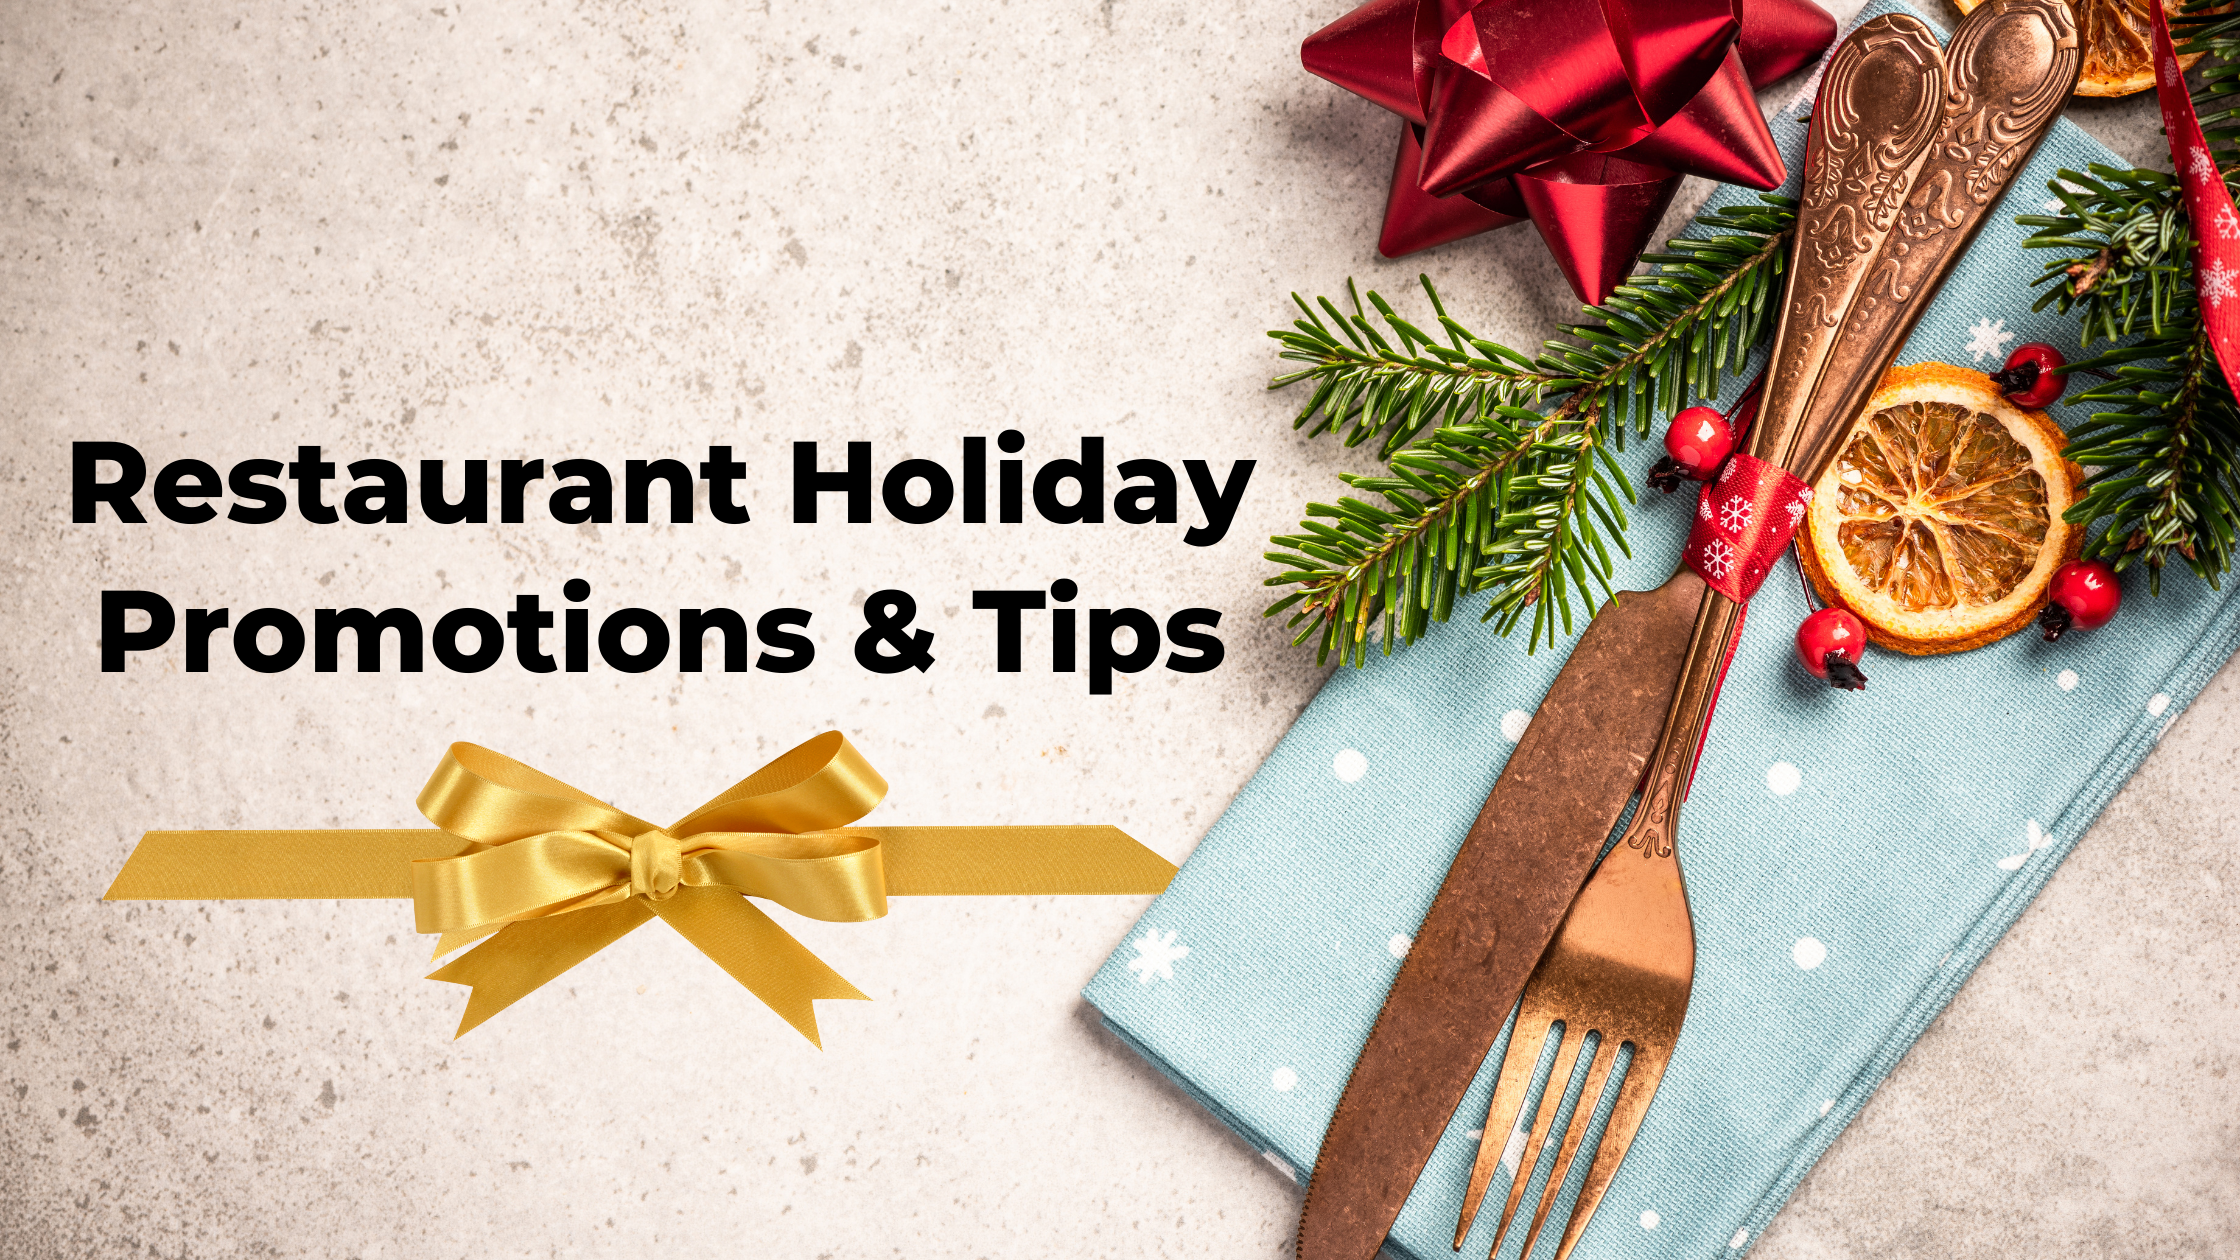 Restaurant Holiday Promotions and Tips 2021